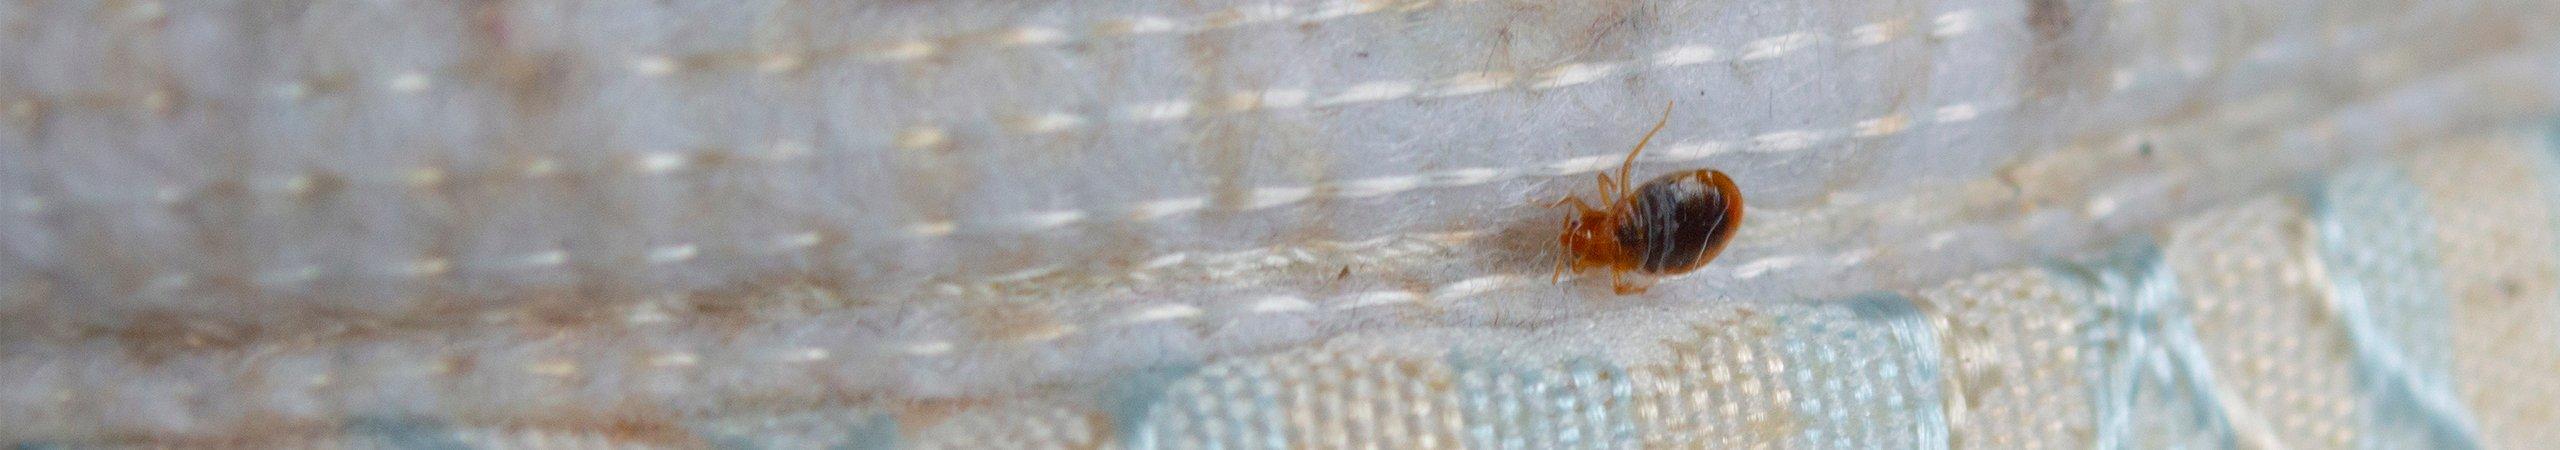 an engorged bed bug crawling on a mattress